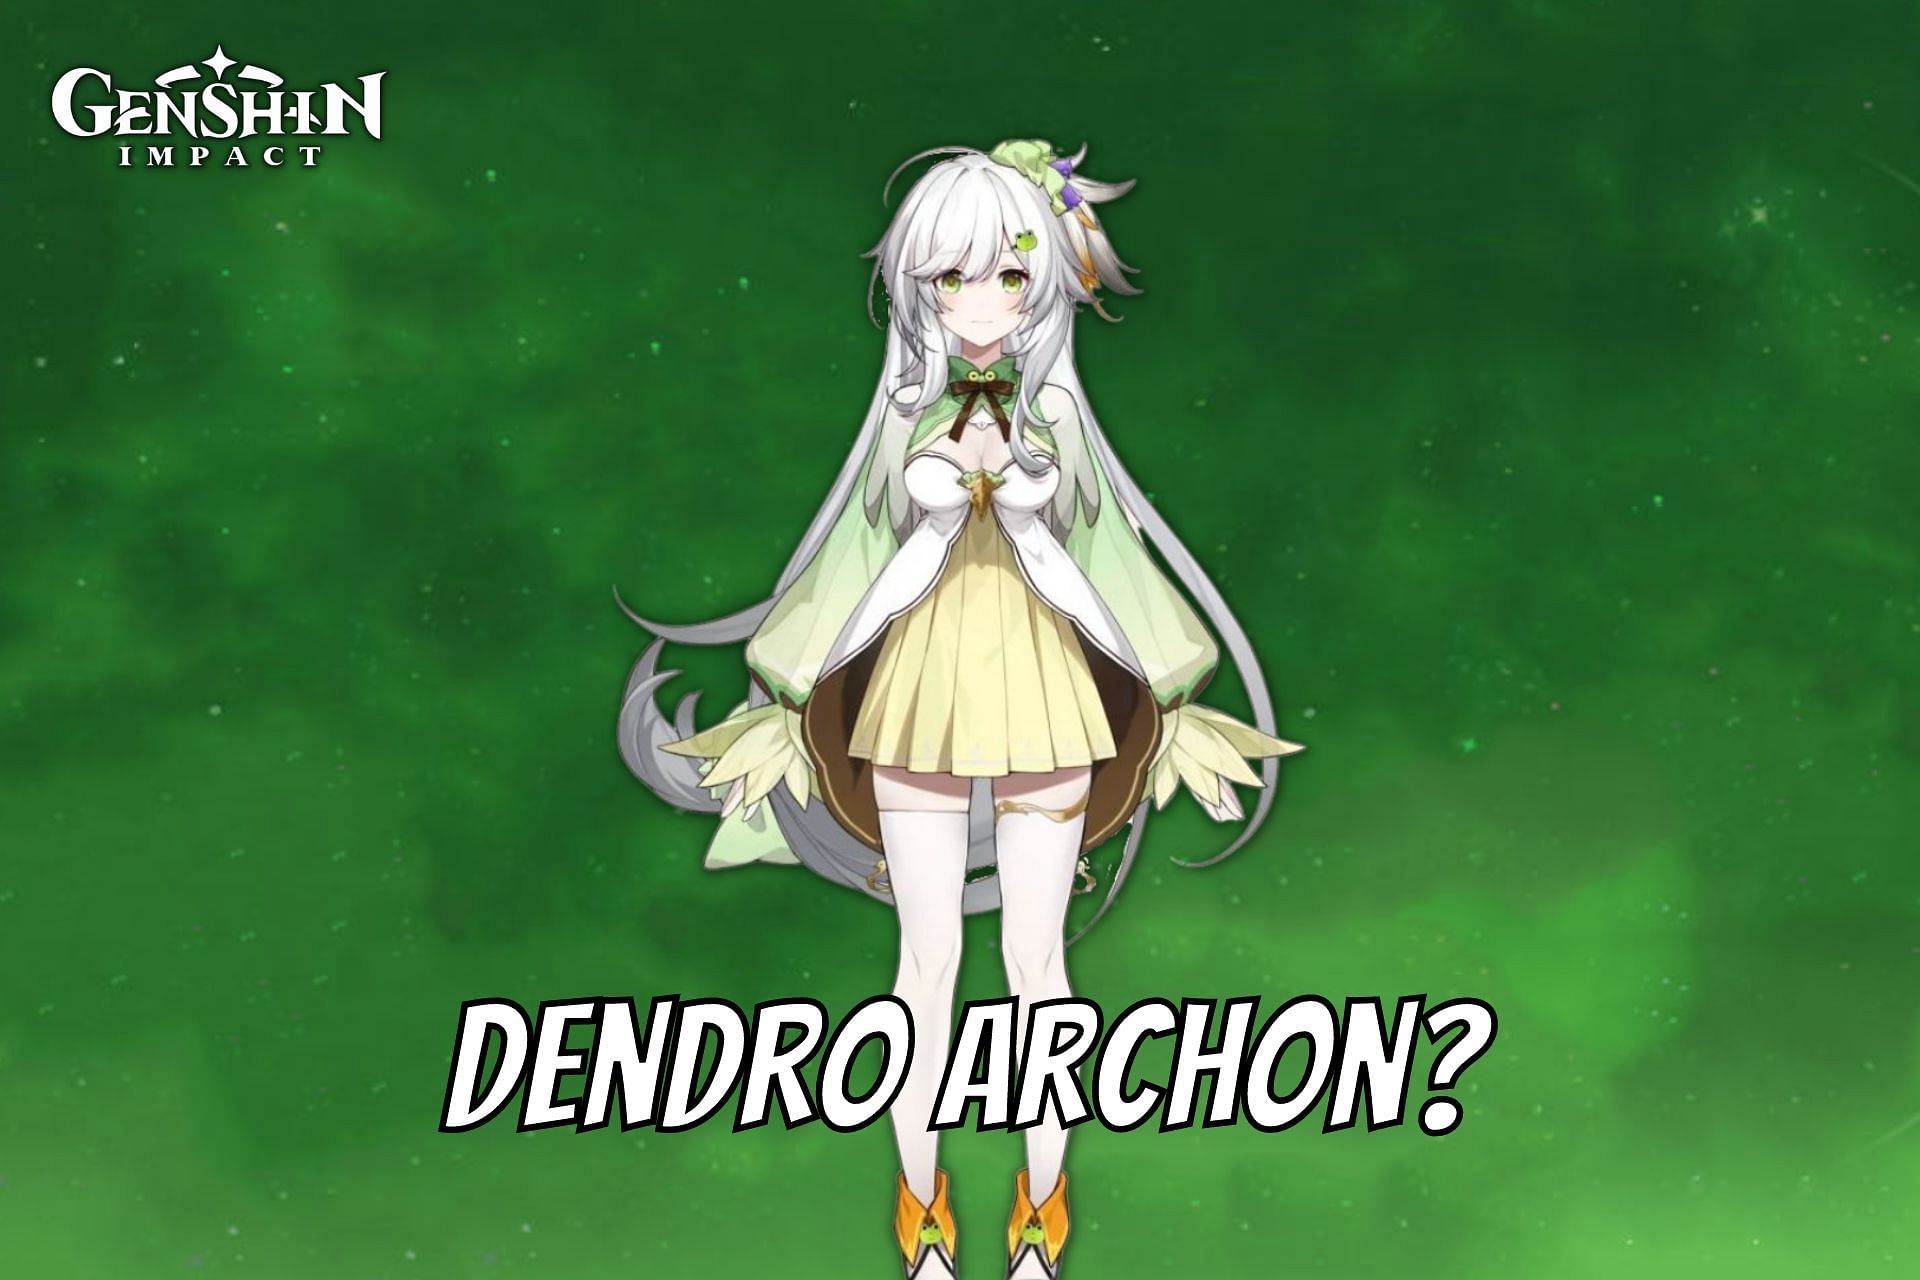 This is what the Dendro Archon in Genshin Impact might look like (Image via Sportskeeda)